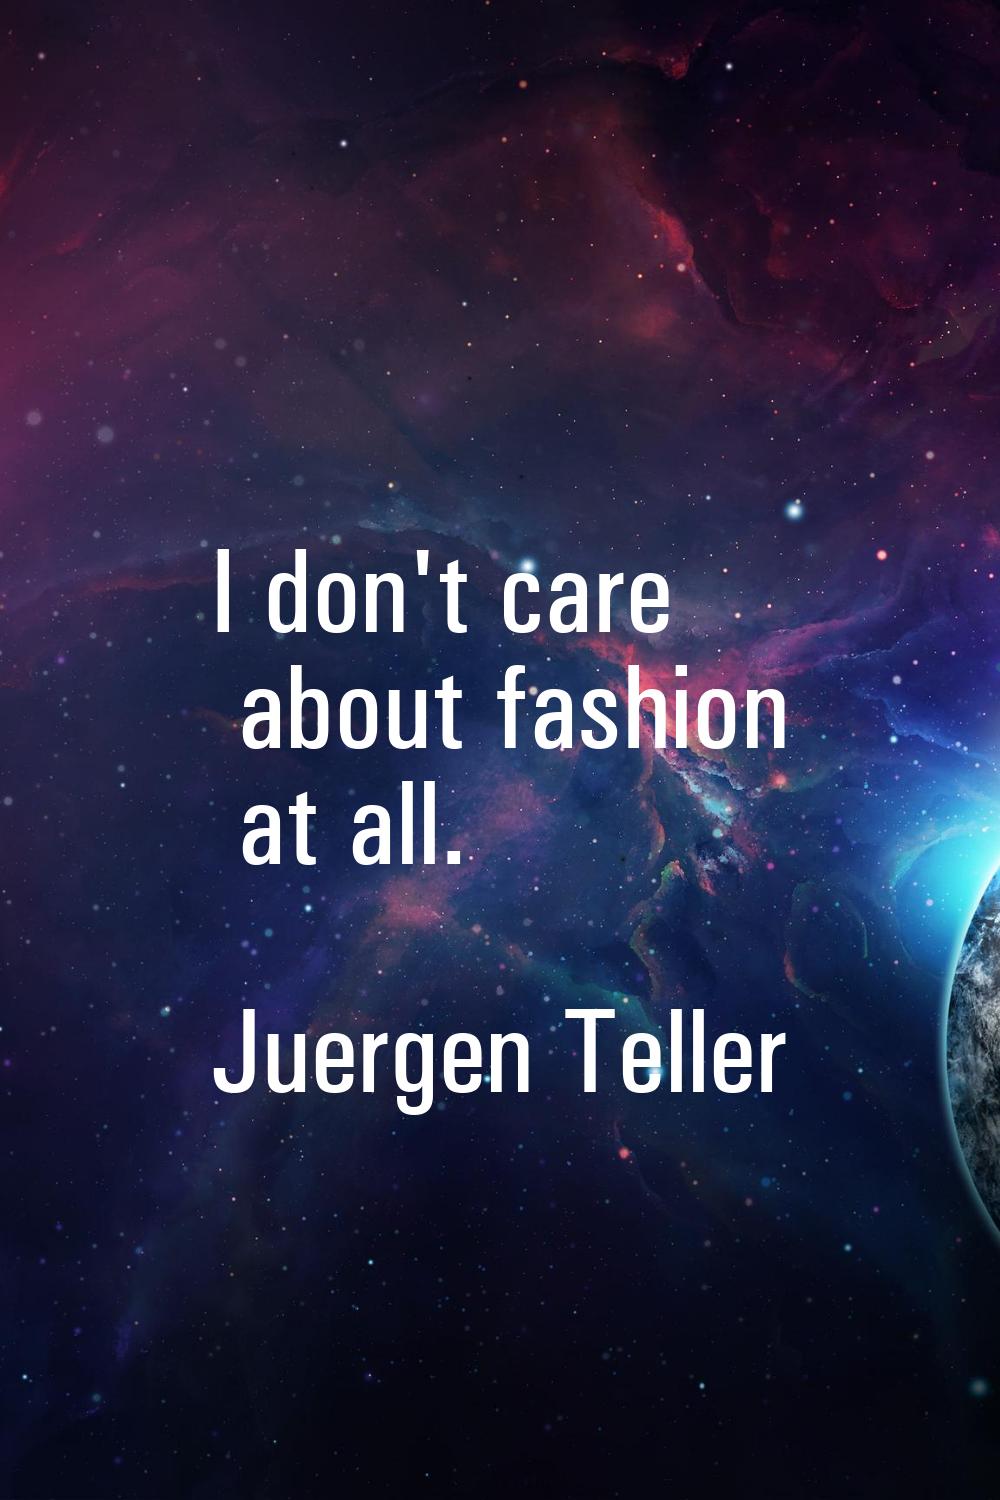 I don't care about fashion at all.